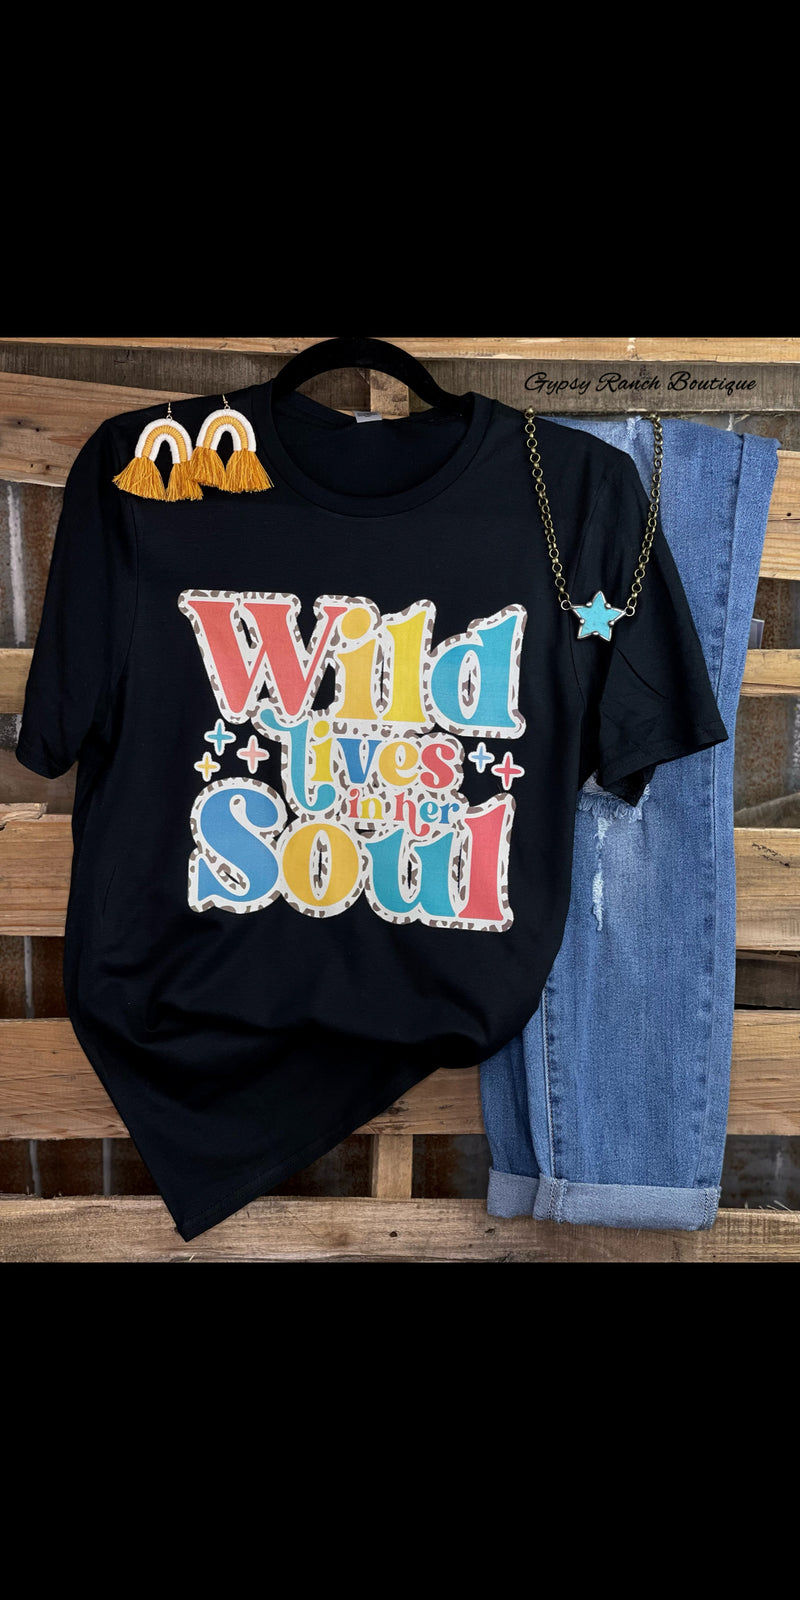 Wild Lives in Her Soul Tee - Also in Plus Size